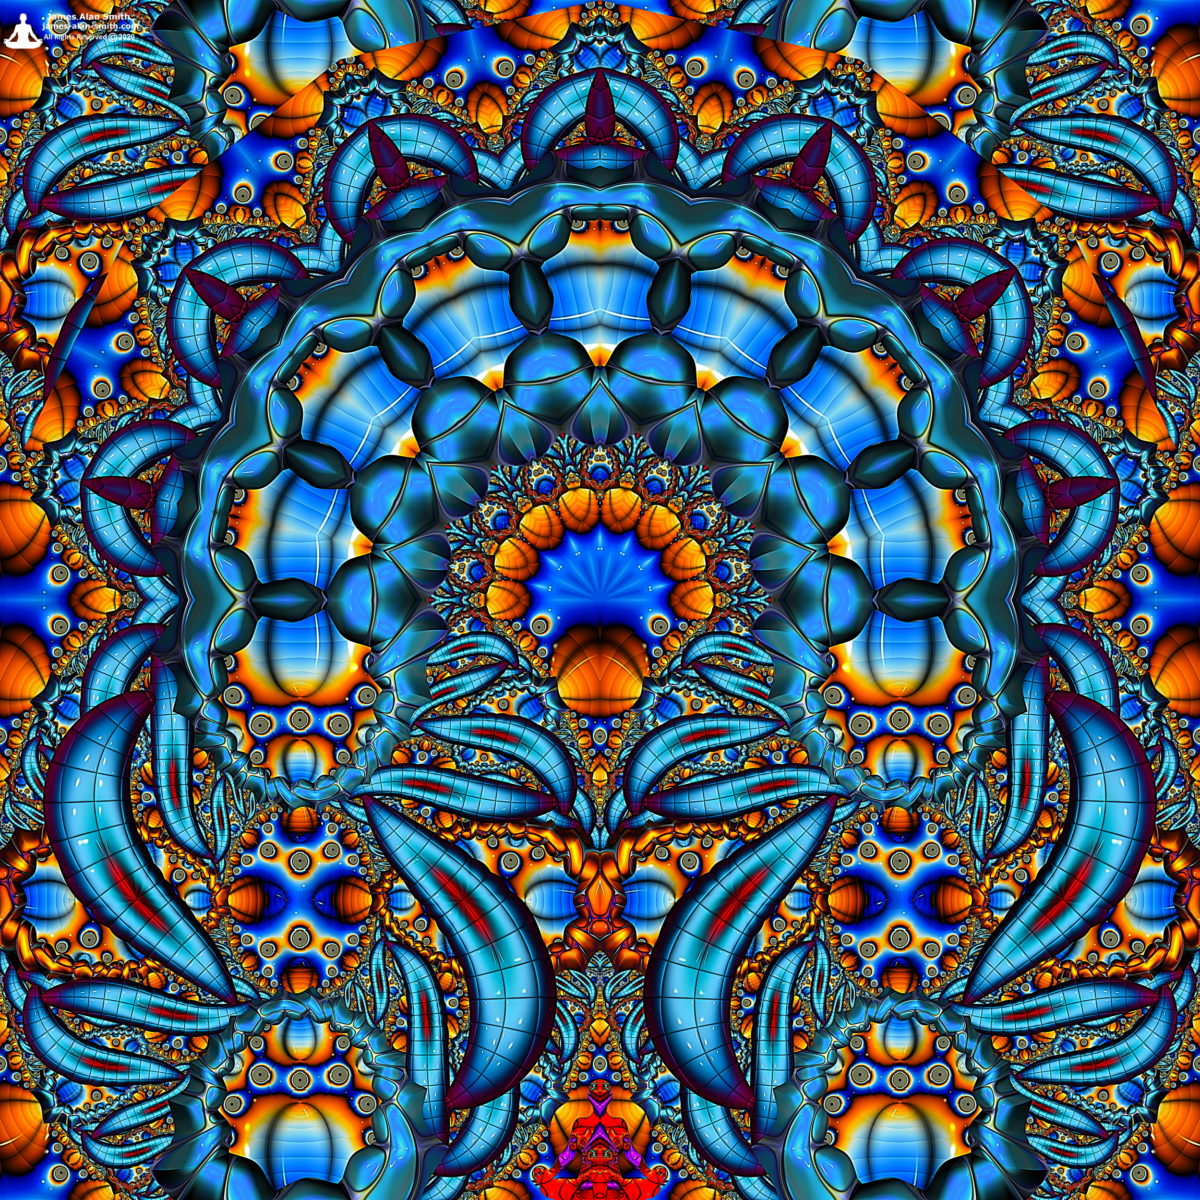 Bionic Dreams of the Holofractal Realm: Artwork by James Alan Smith